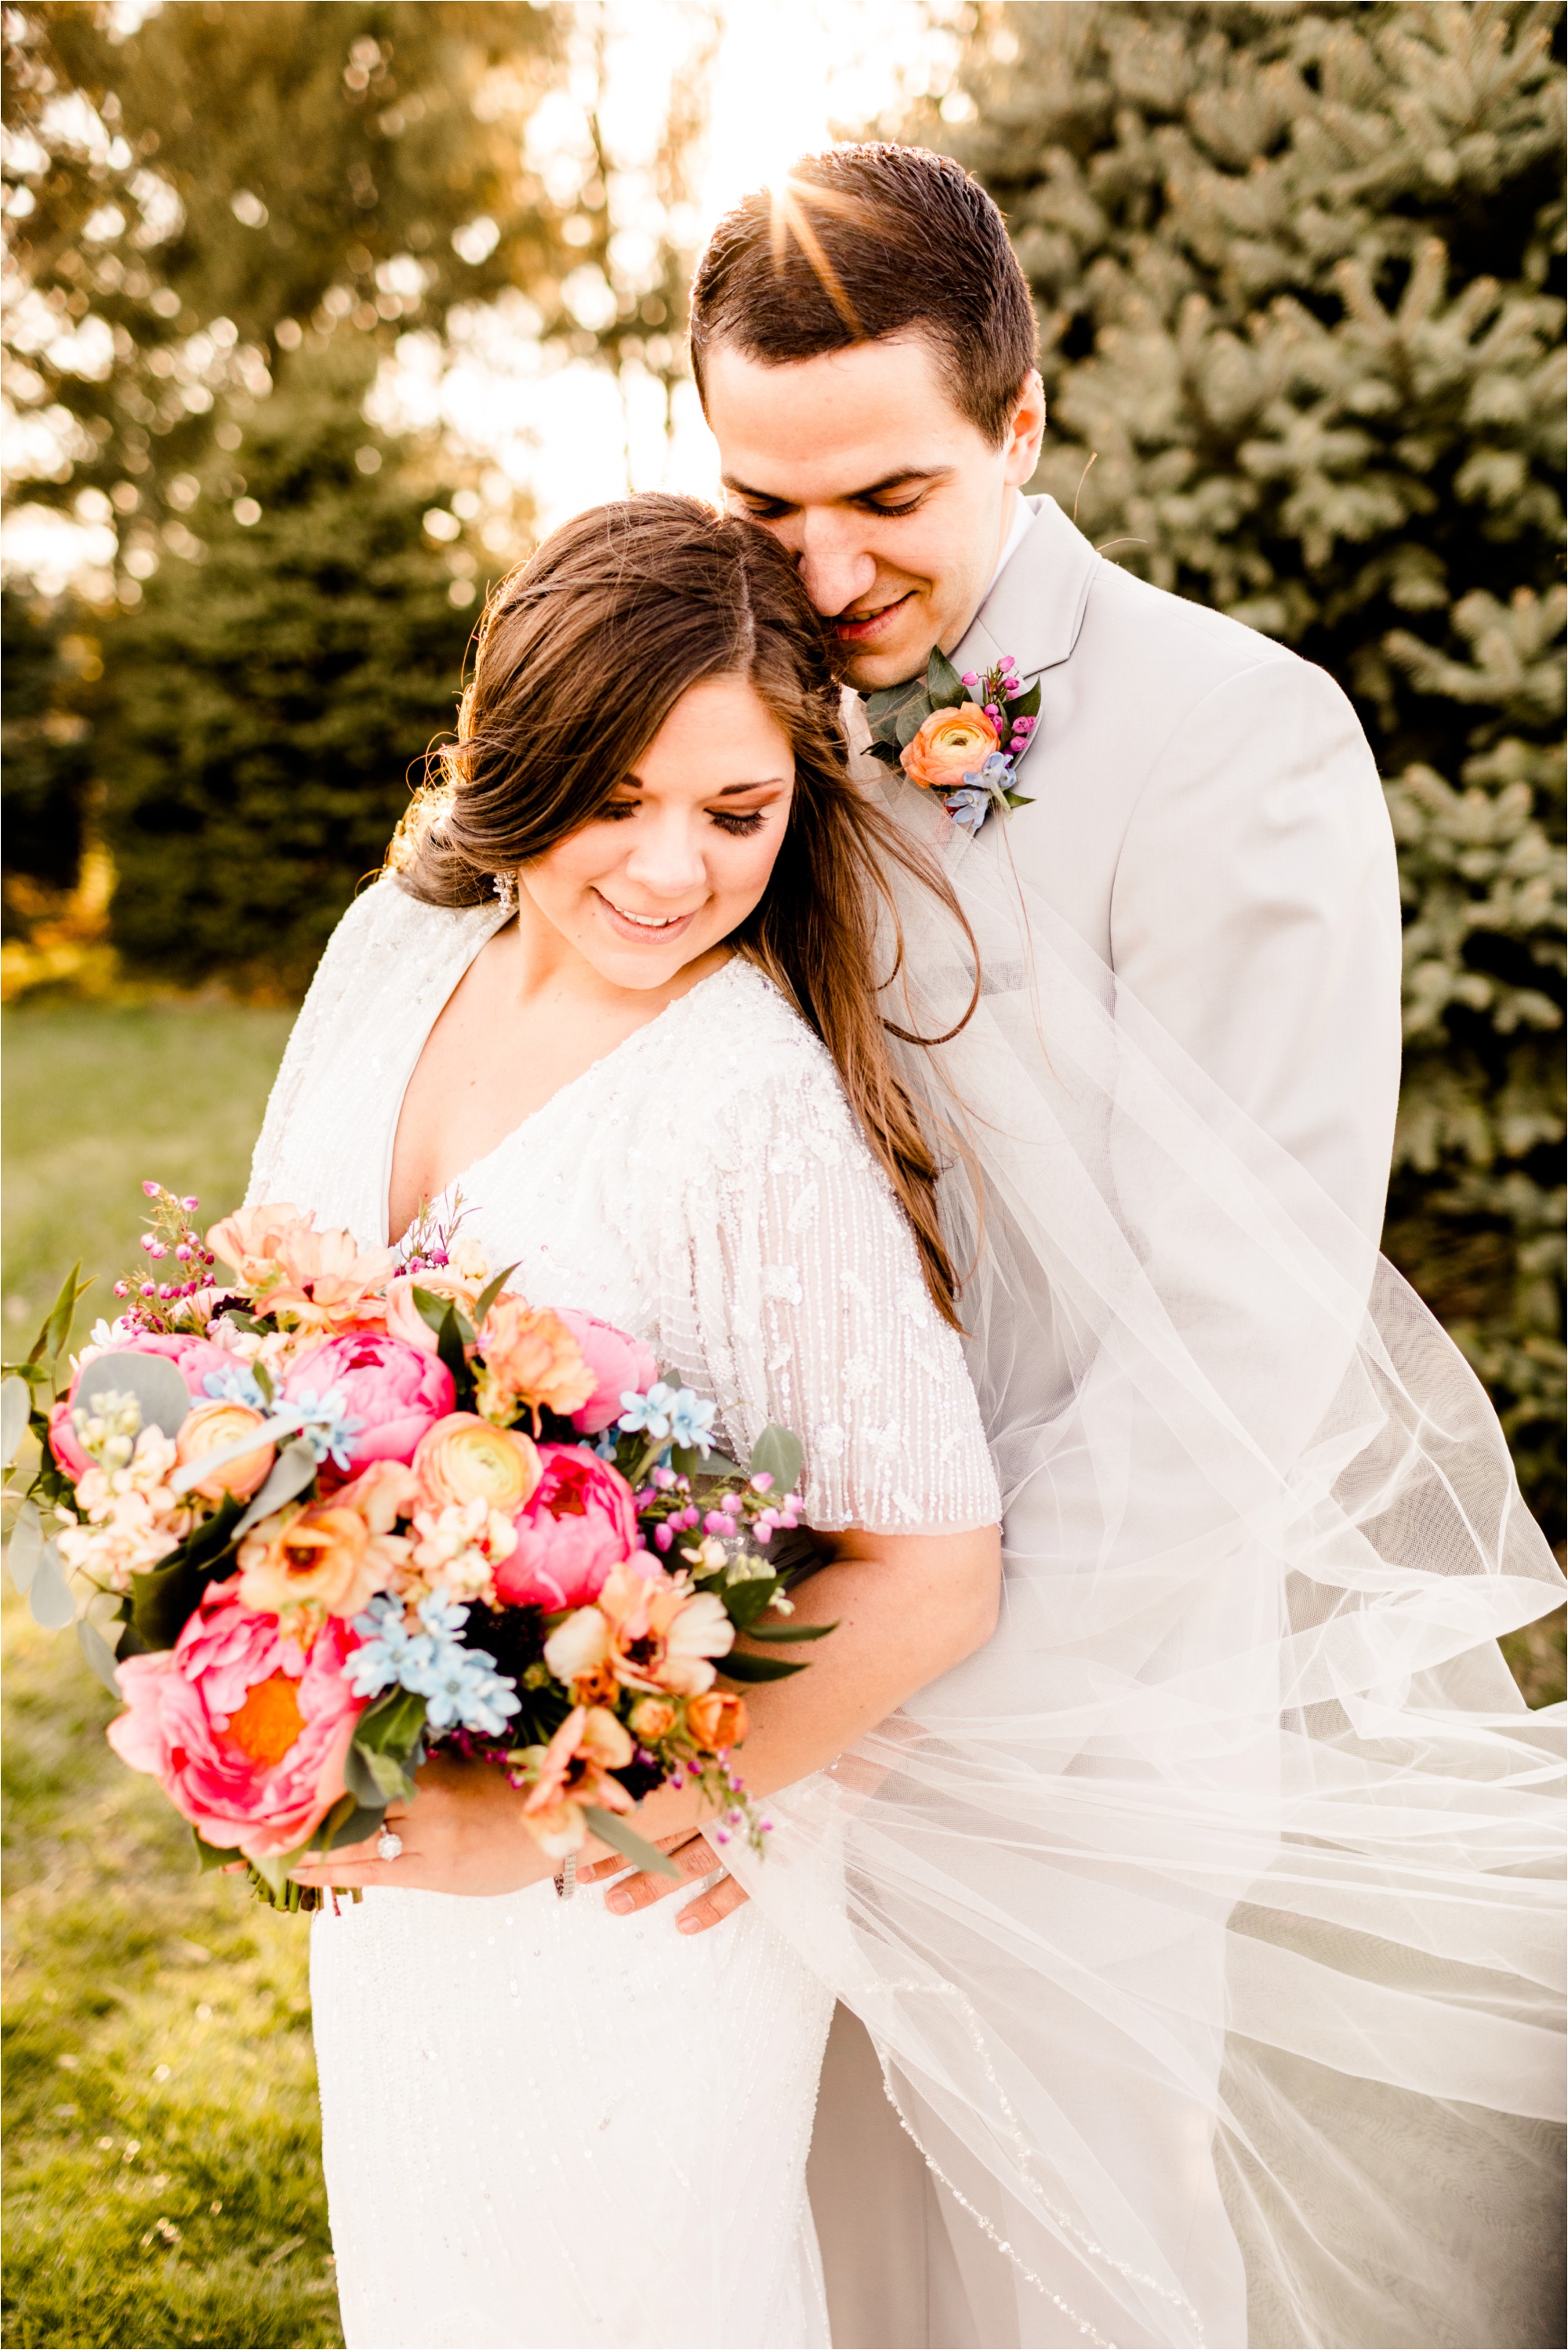 Caitlin and Luke Photography, Illinois Wedding Photographers, Champaign Wedding Photographers, Bloomington Normal Wedding Photographers, Romantic Red and Pink Sunset Styled Shoot_9550.jpg